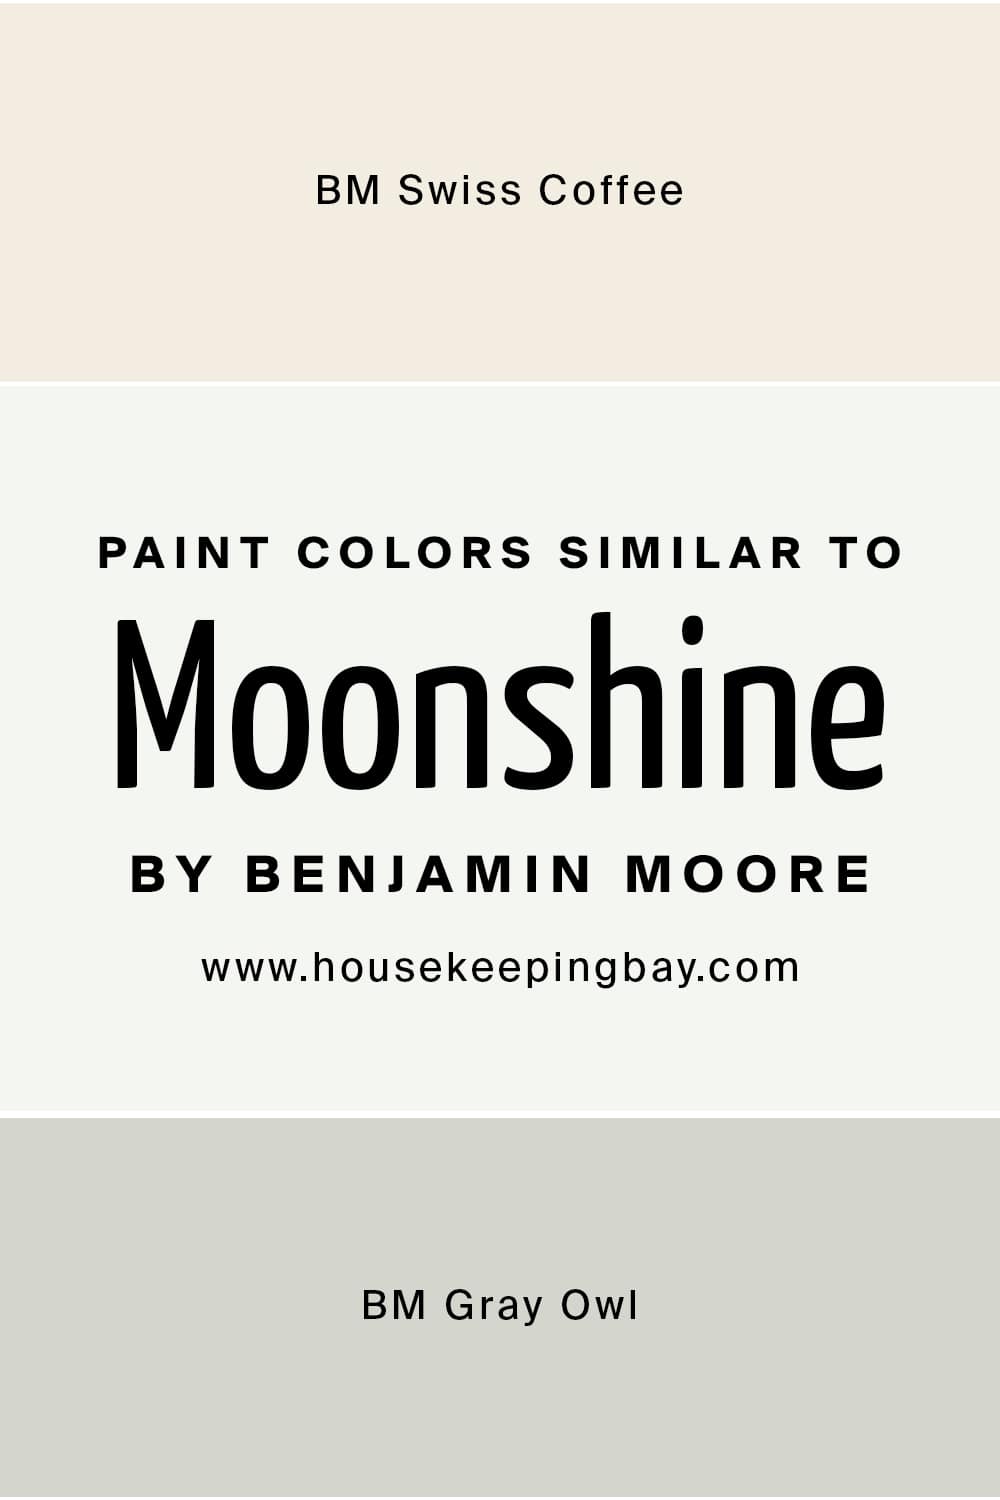 Paint Colors Similar to Moonshine by Benjamin Moore